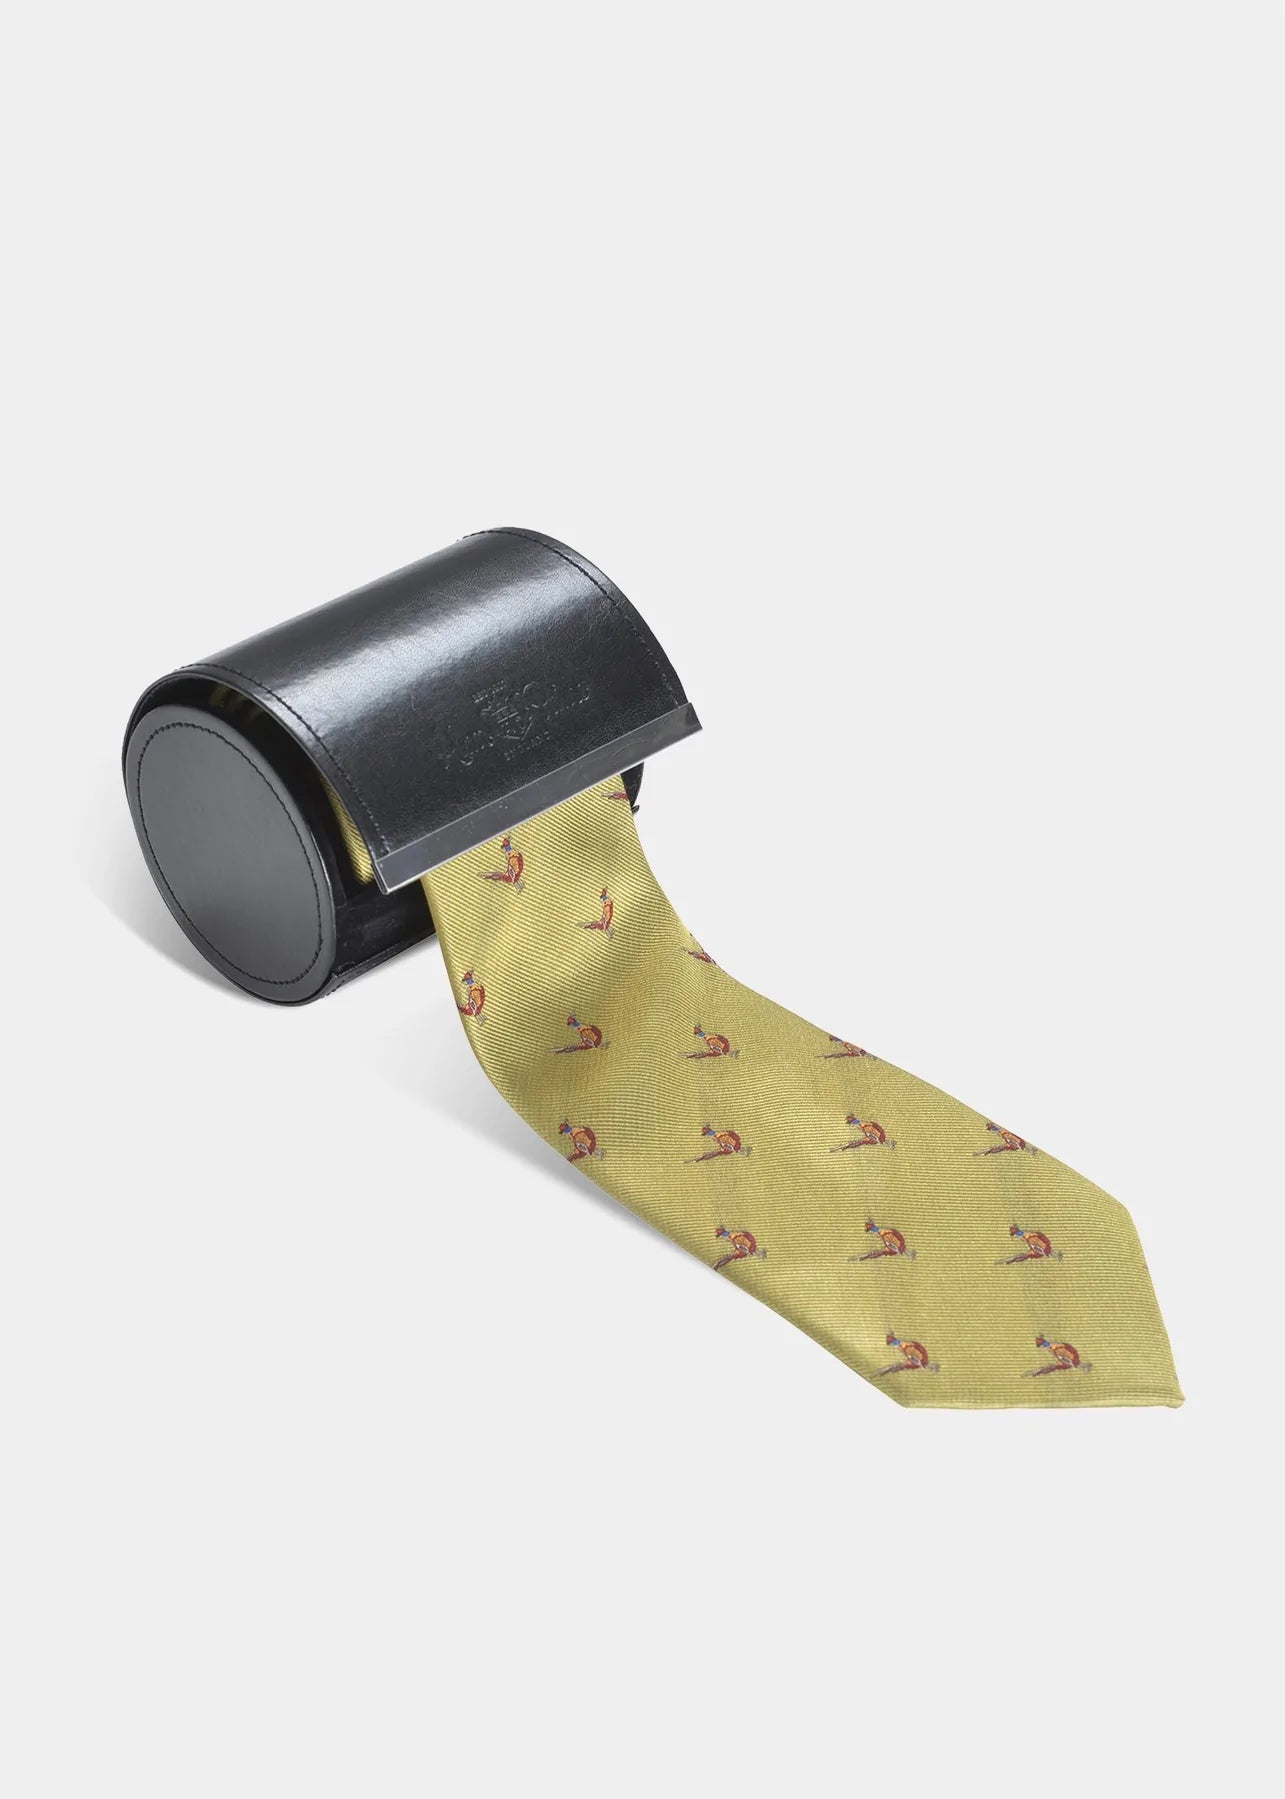 Ripon Men's Silk Country Tie with Standing Pheasant Design